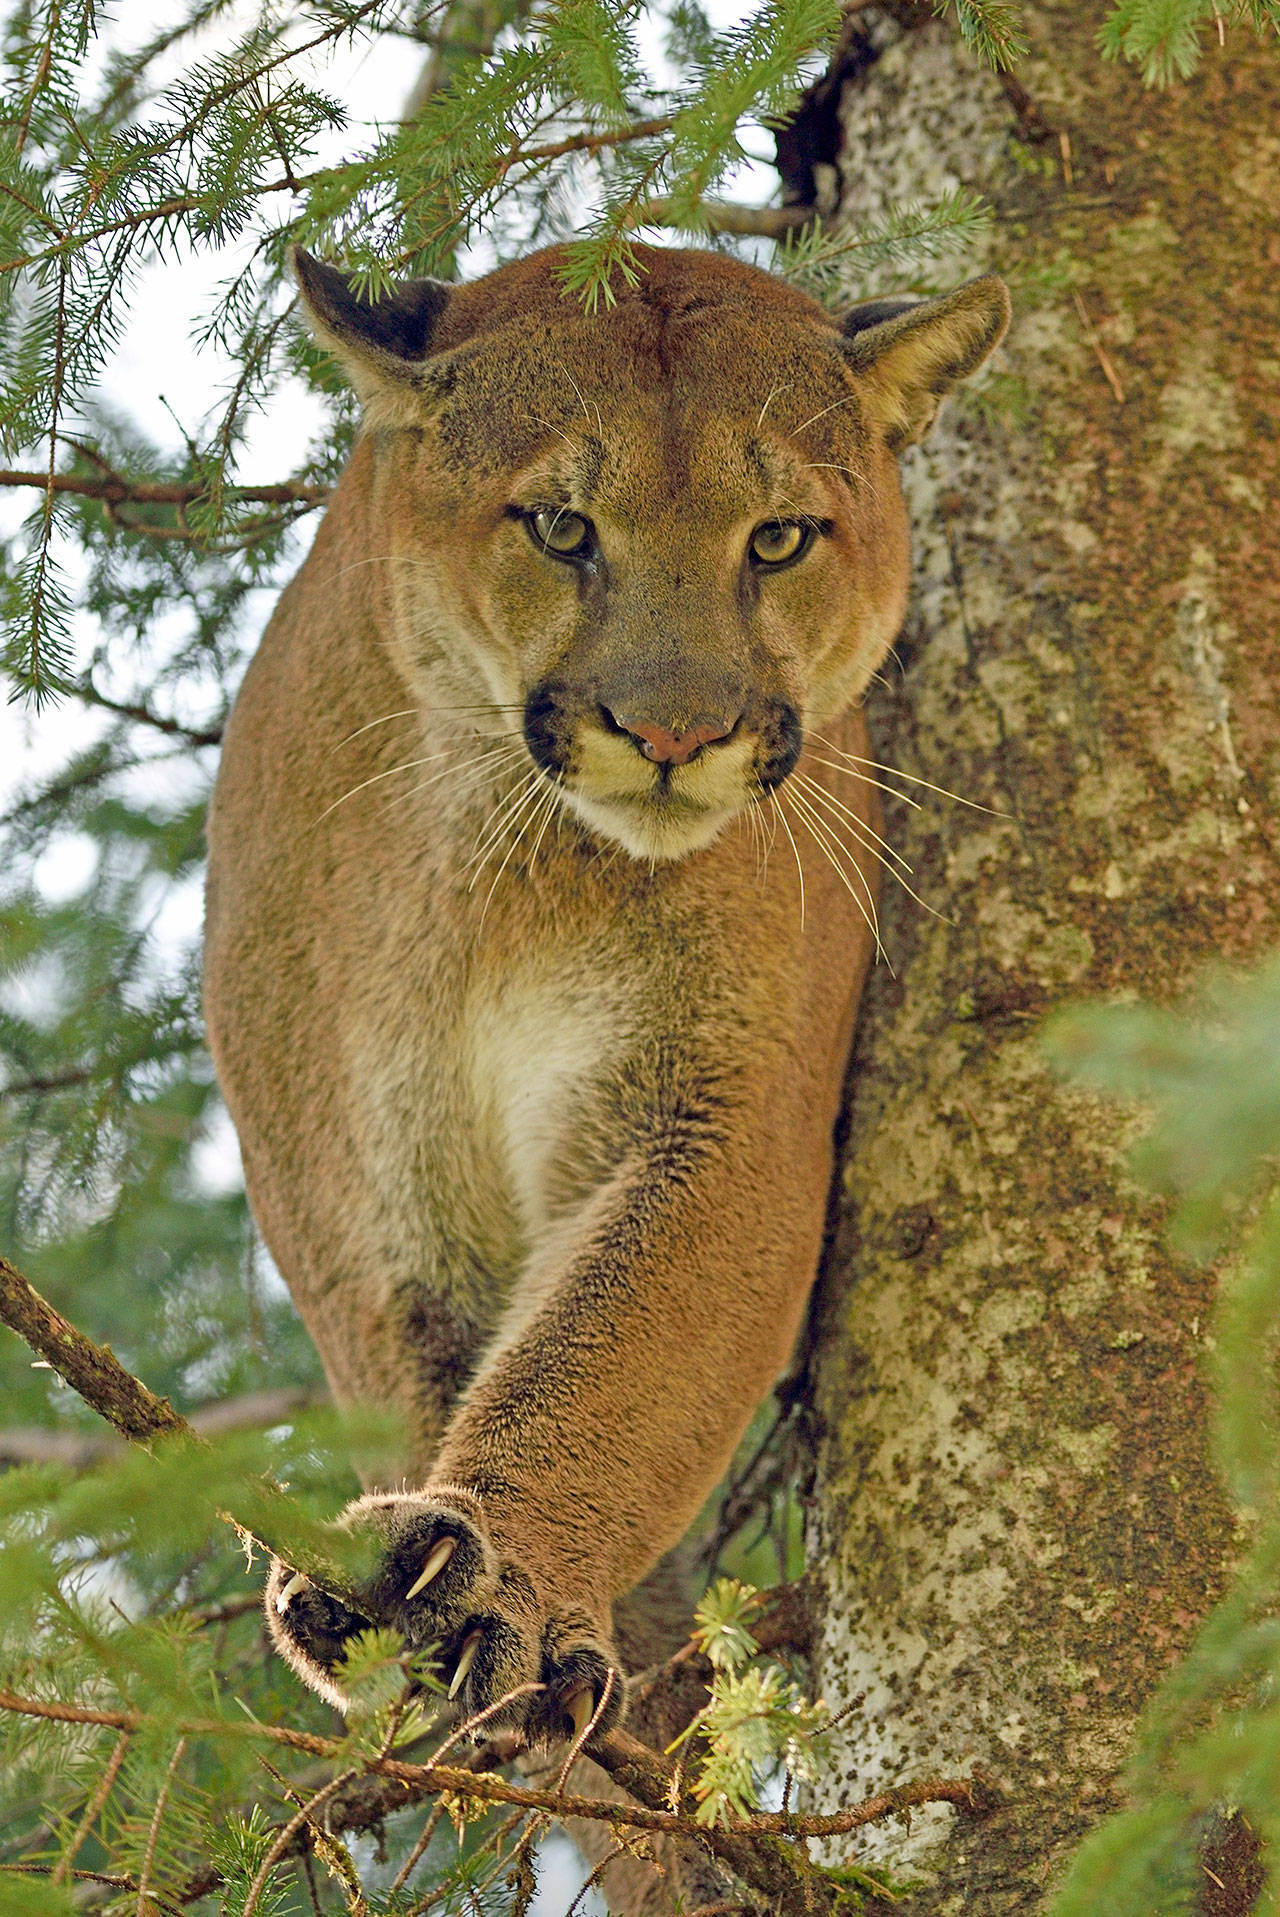 Learn about cougars on the North Olympic Peninsula at the North Olympic Land Trust’s annual Conservation Breakfast on April 2. Pictured above is “Charlotte” and right is “Hoko.” Photos by Dave Shreffler